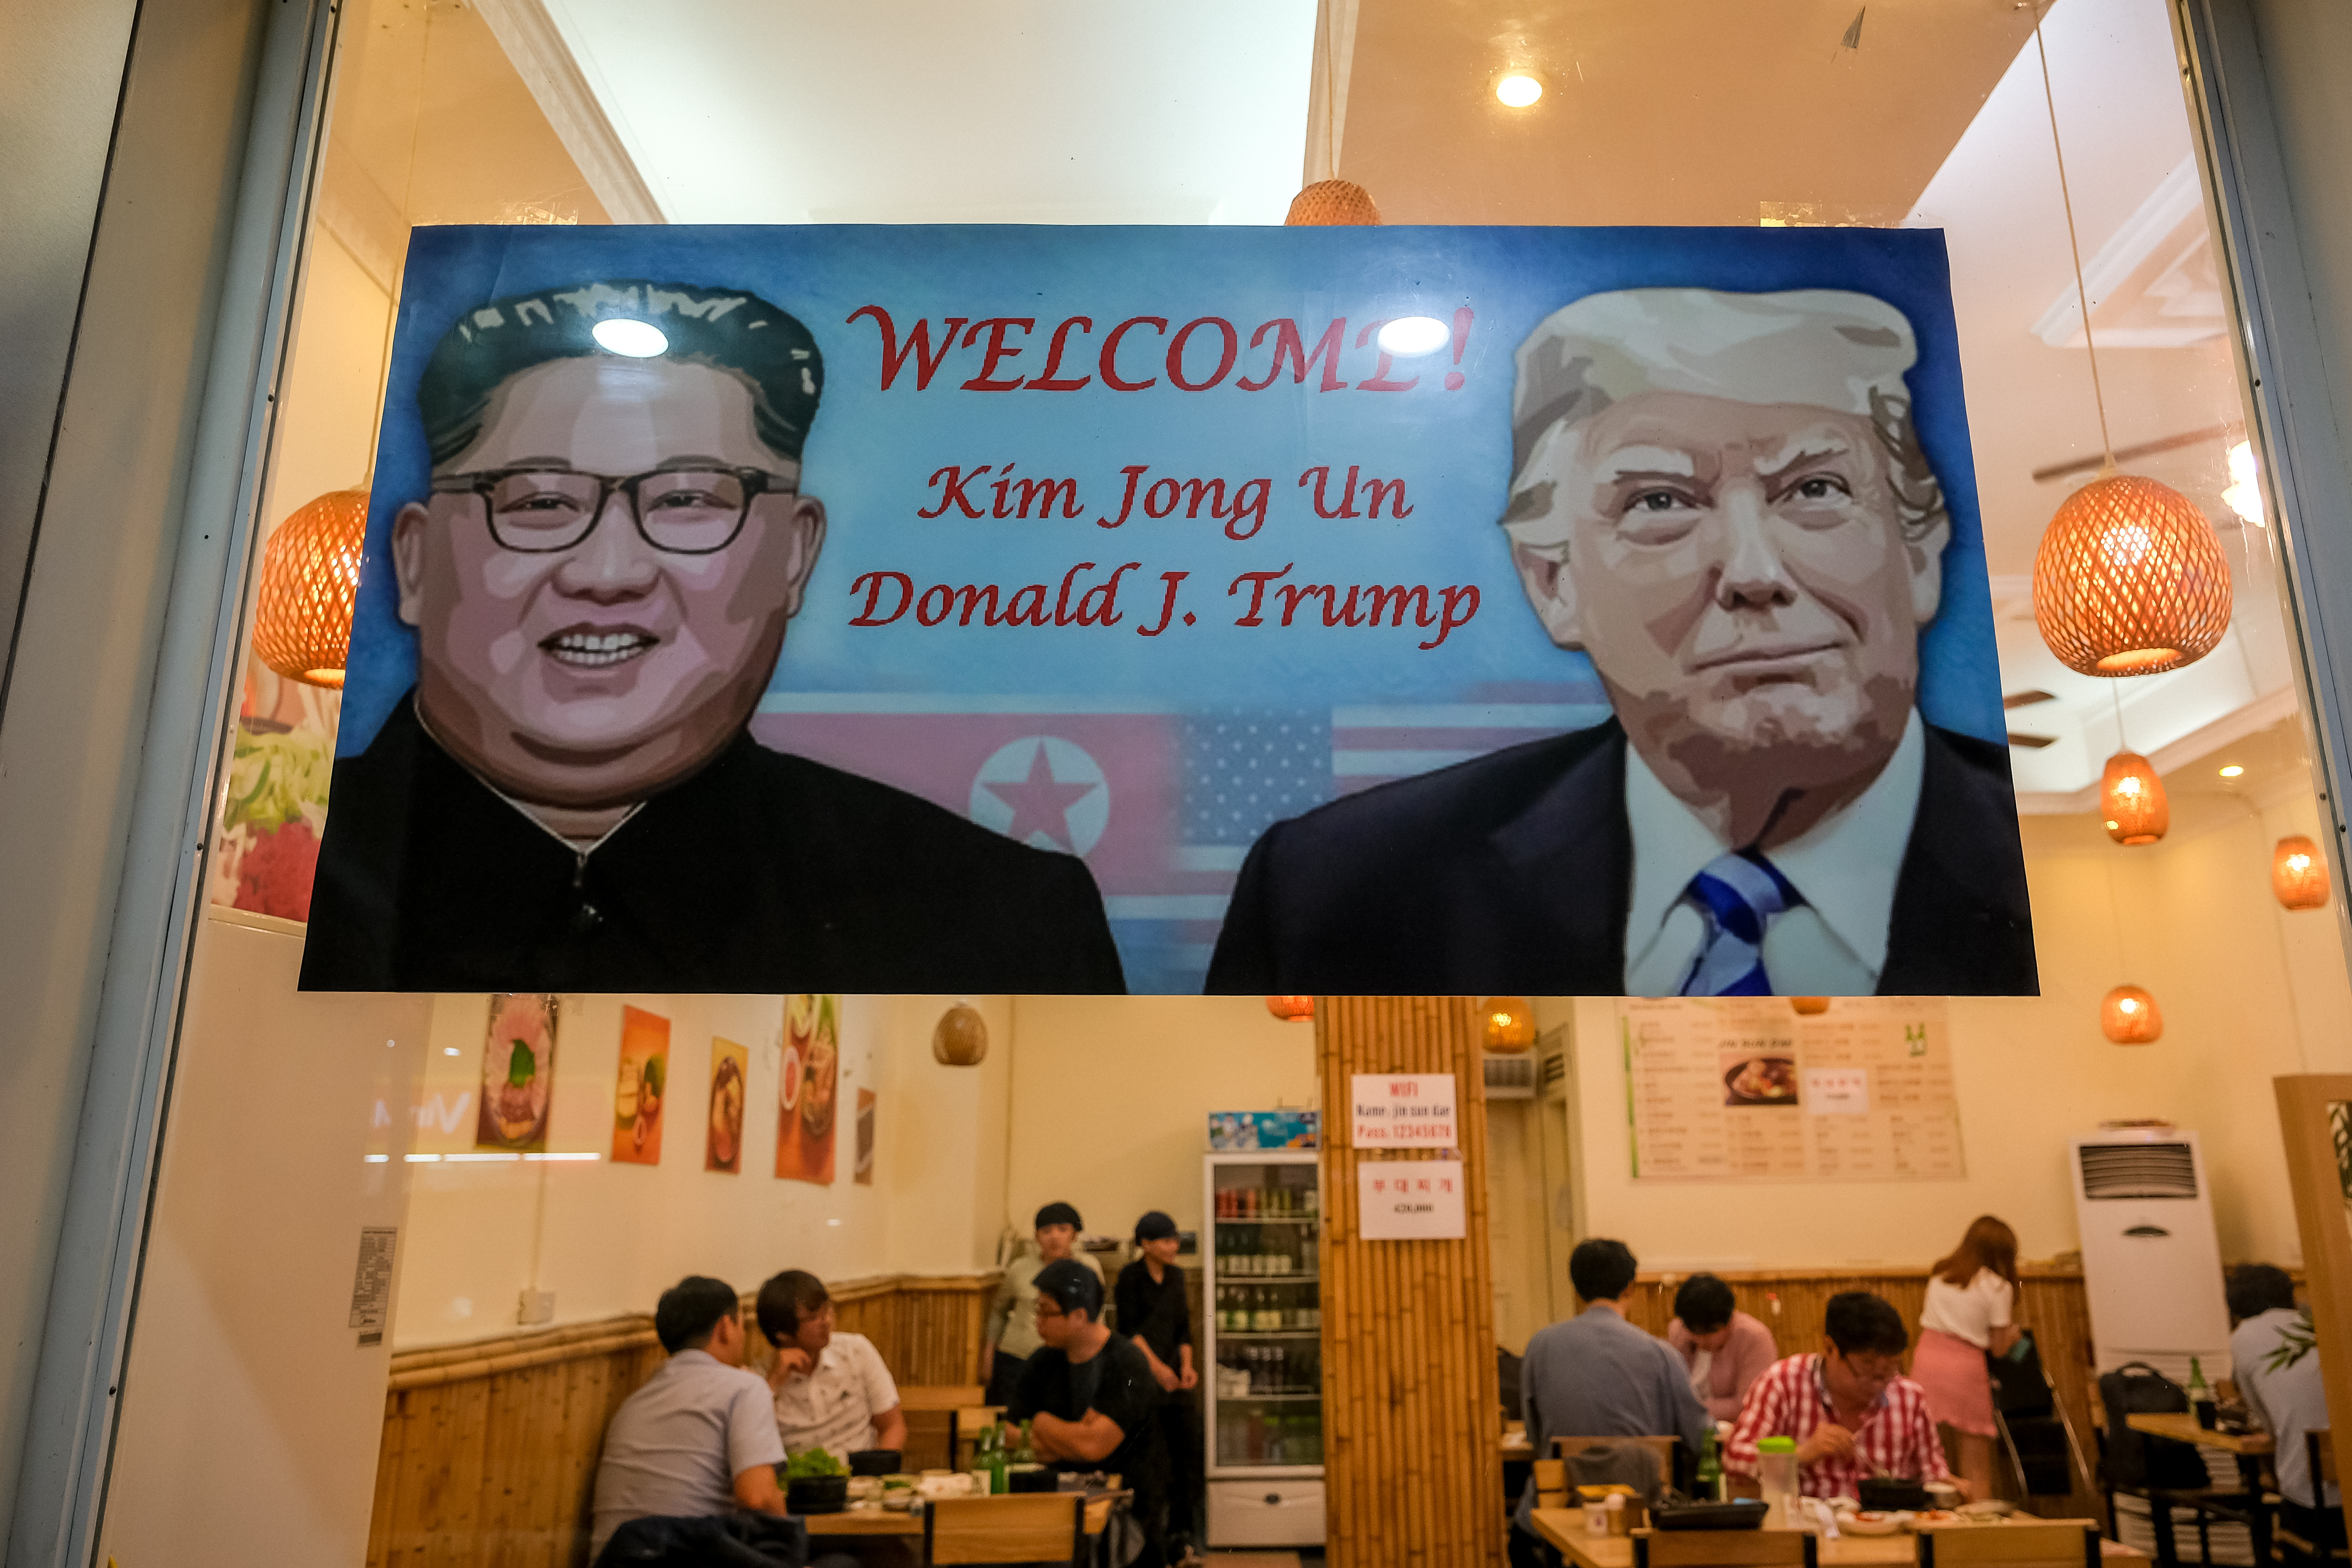 A signboard welcomes the upcoming summit between President Donald Trump and North Korean leader Kim Jong Un at South Korean restaurant on February 20, 2019, in Hanoi, Vietnam.